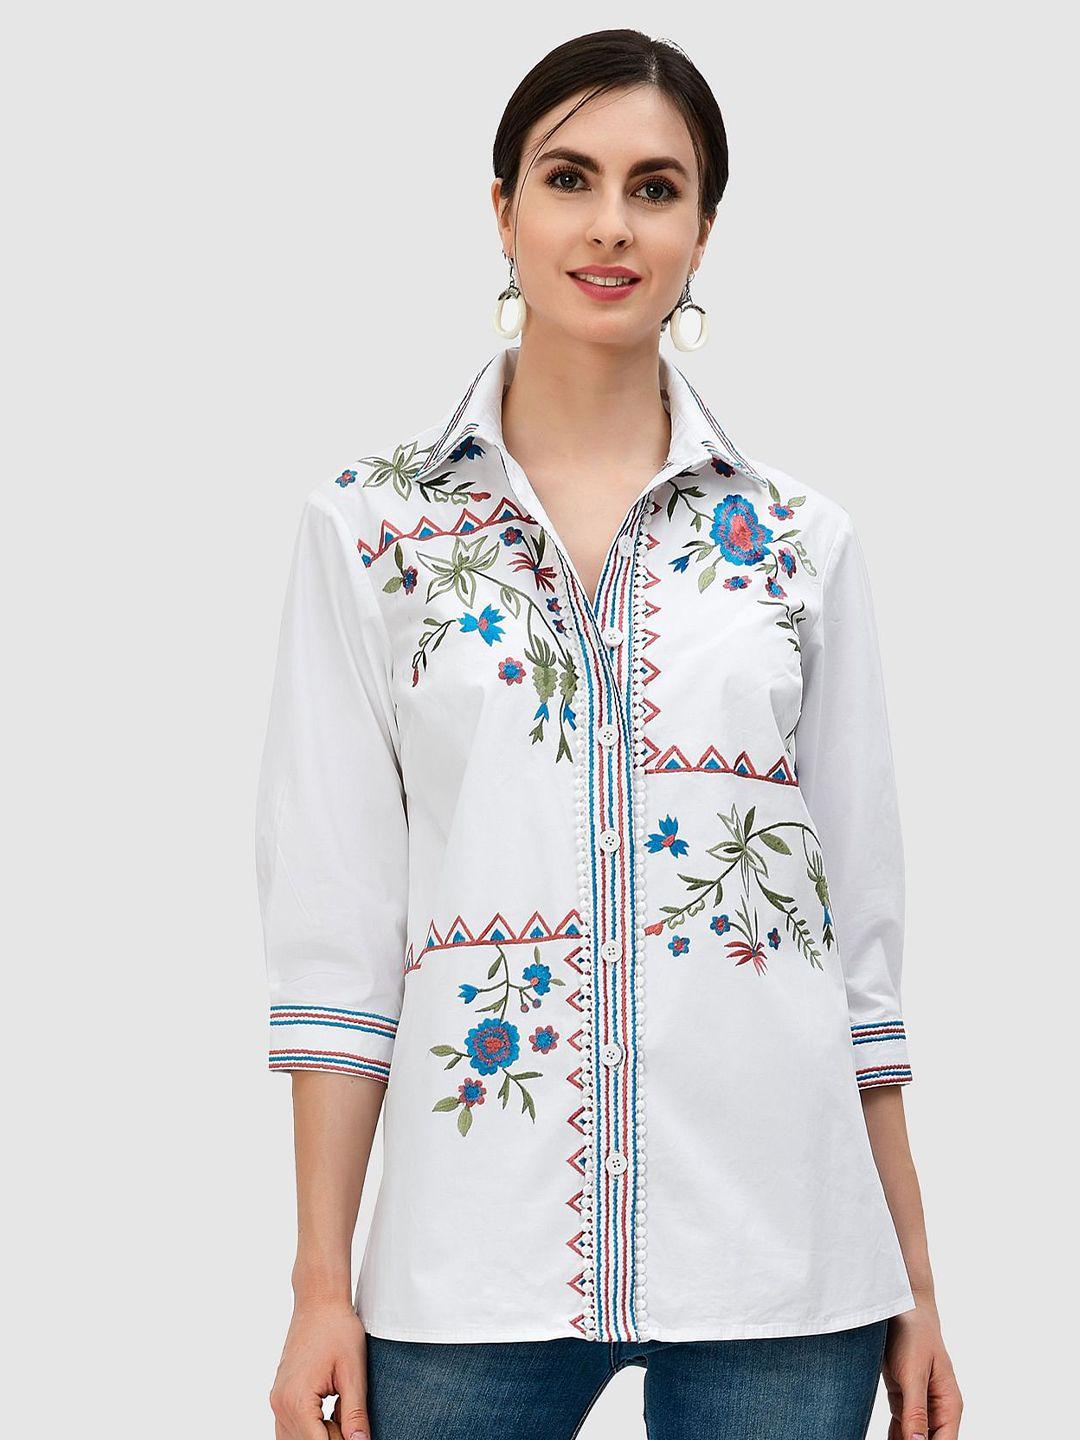 zapelle floral embroidered shirt style top